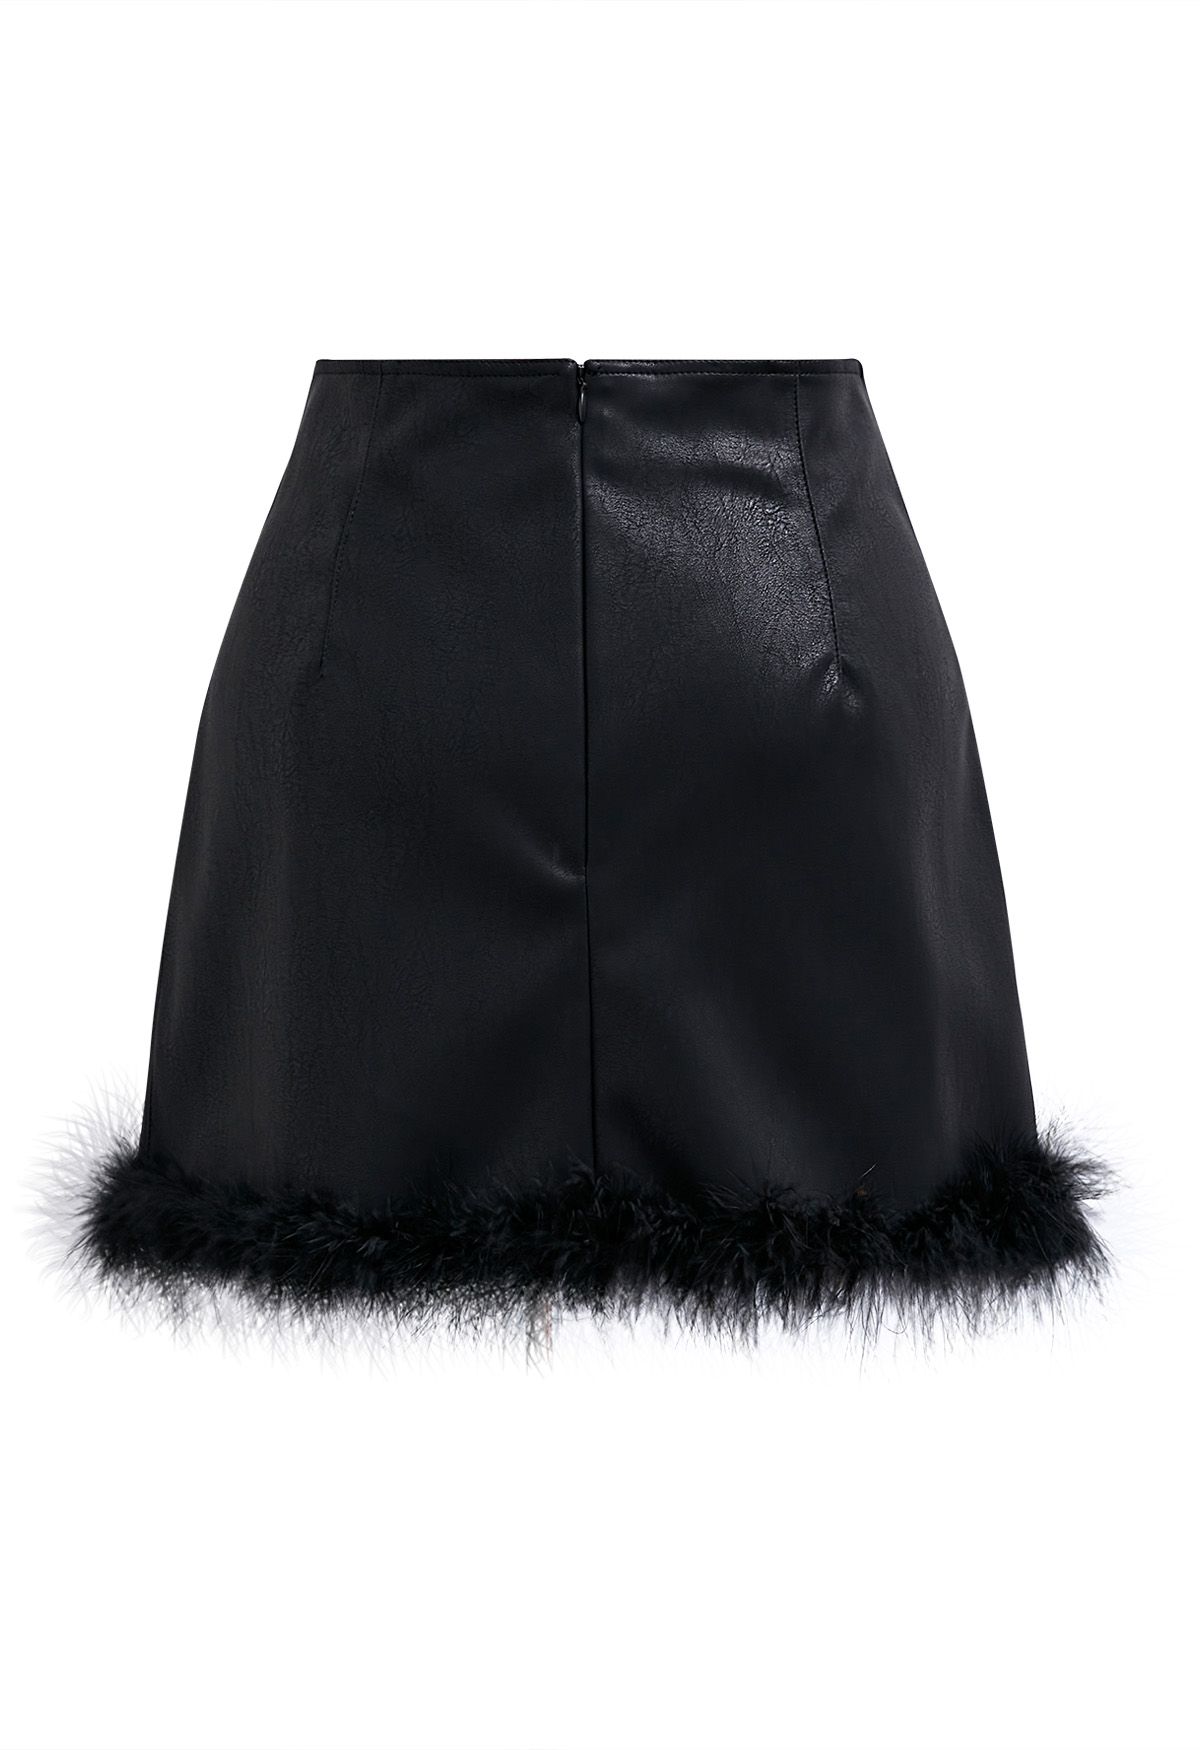 Feather Hem Faux Leather Mini Skirt in Black - Retro, Indie and Unique ...